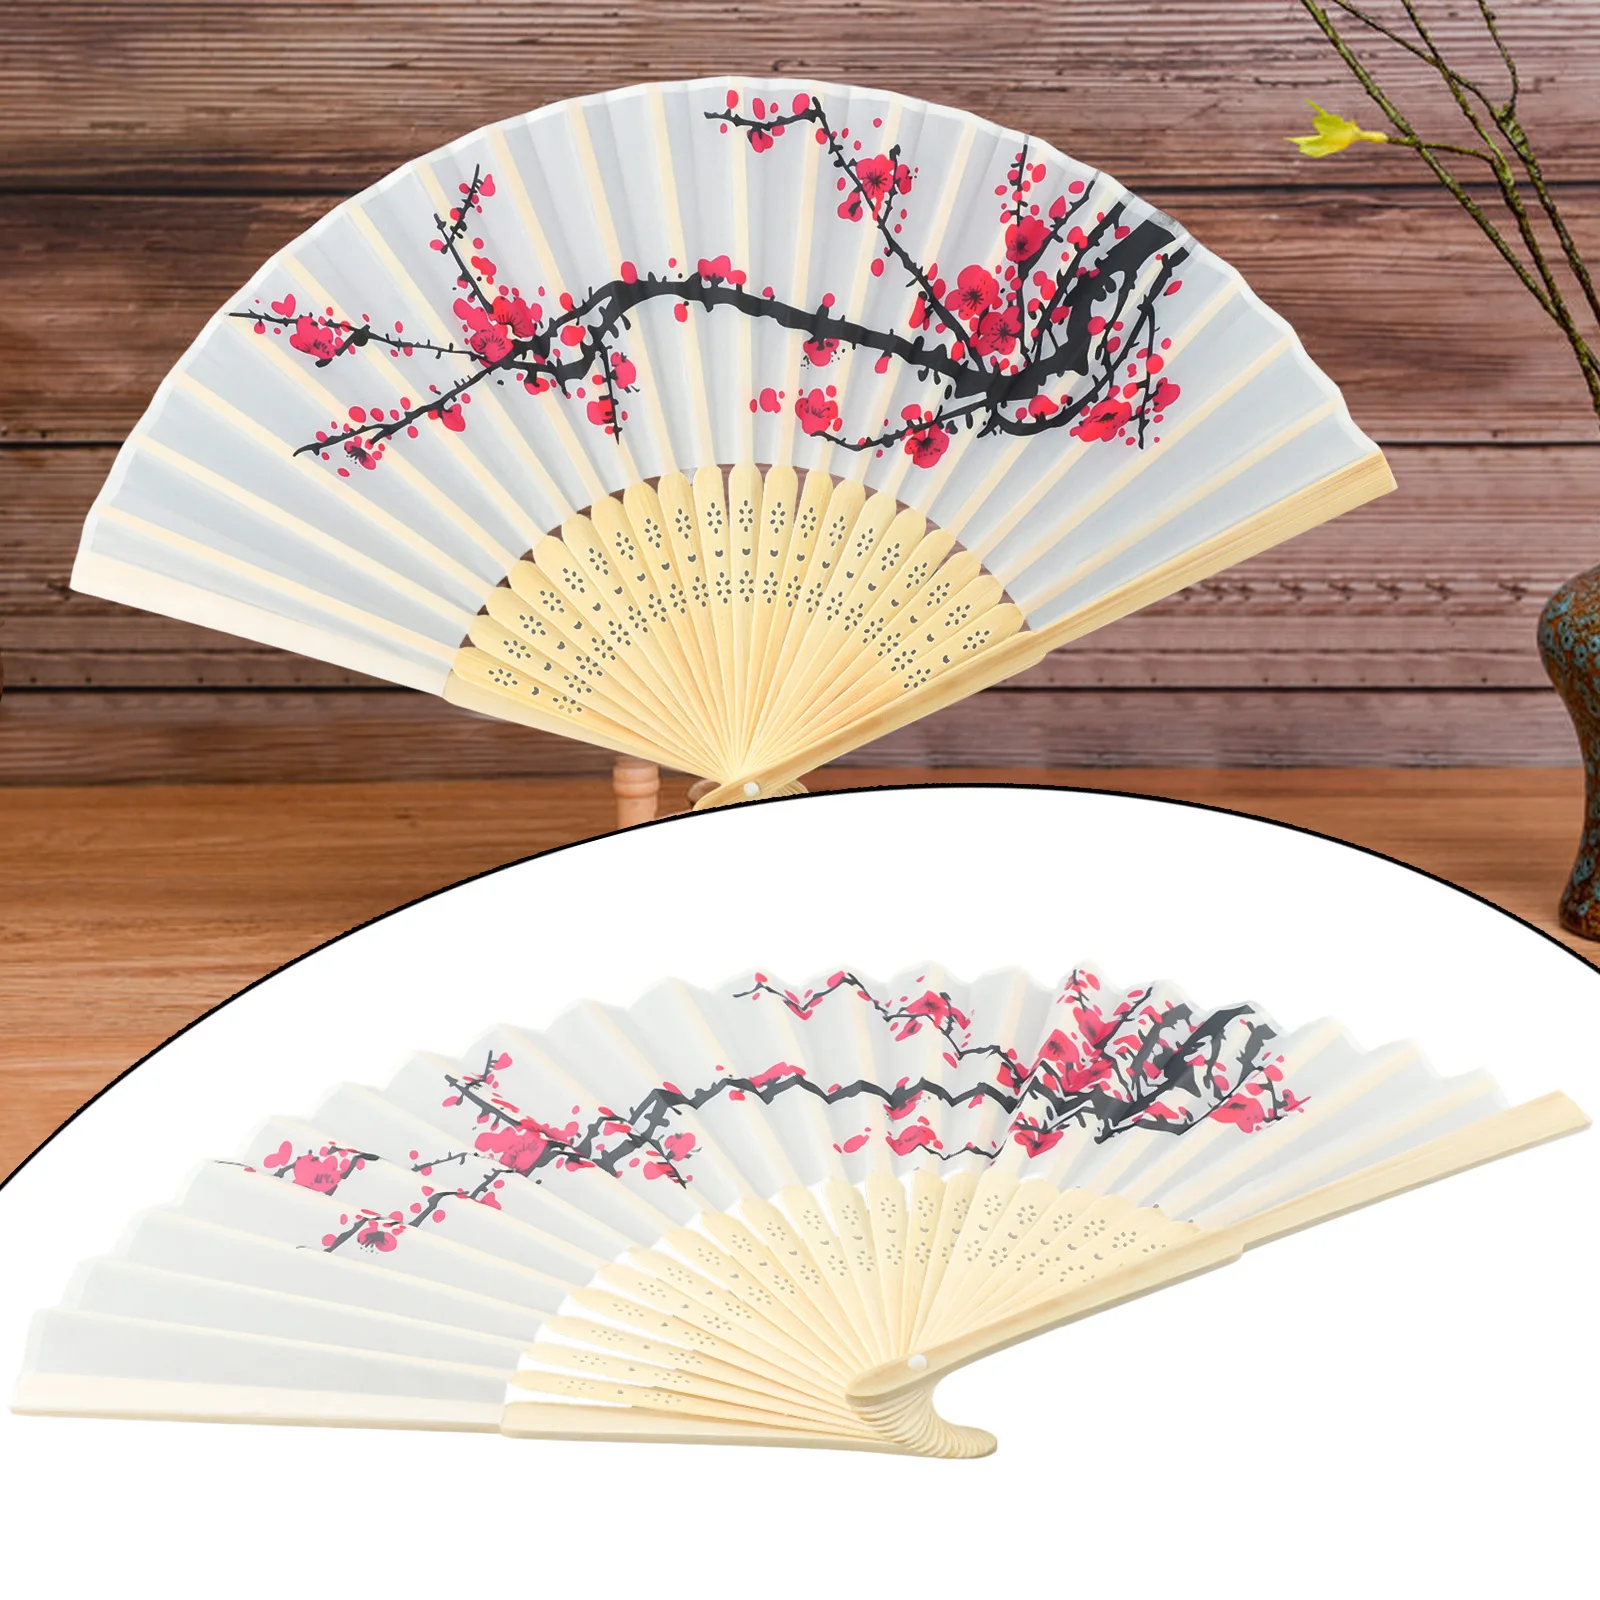 

Plum Blossom Fan Chinese Classical Bamboo Fans Wedding Favor Gift Party Reception Delicate Folding Fans Decor Ornaments